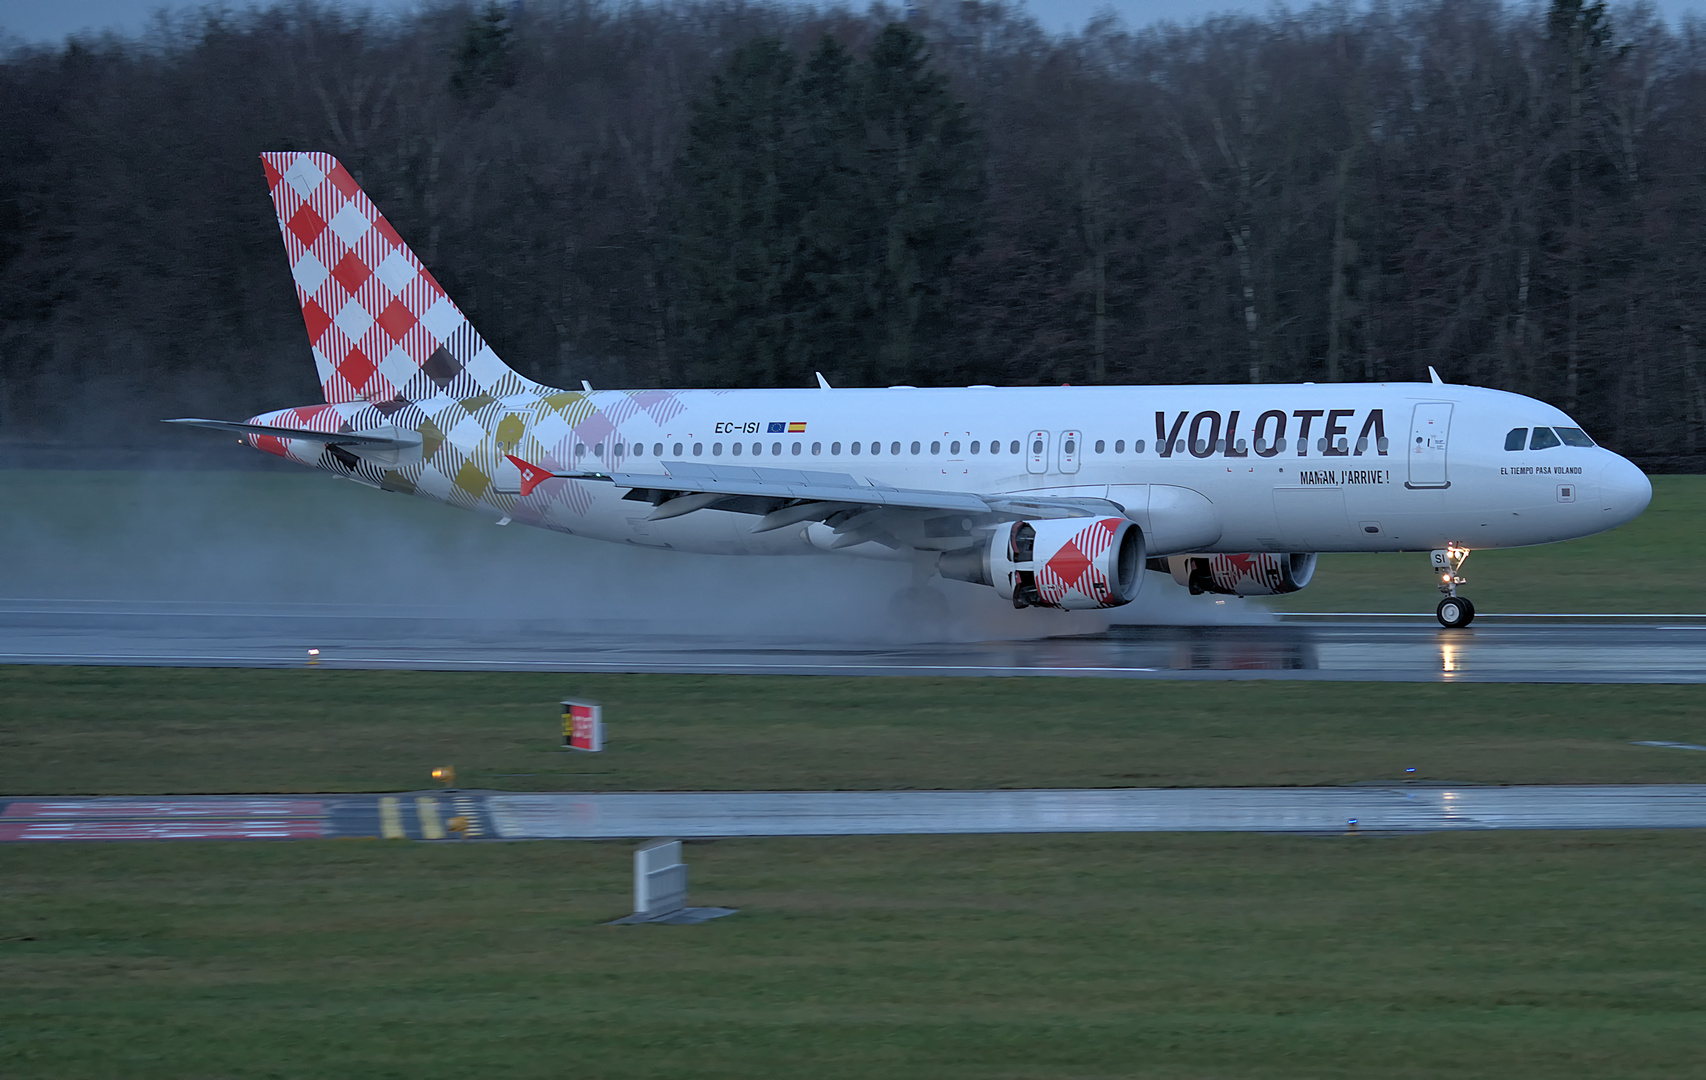  Volotea Airlines Airbus A320-214 